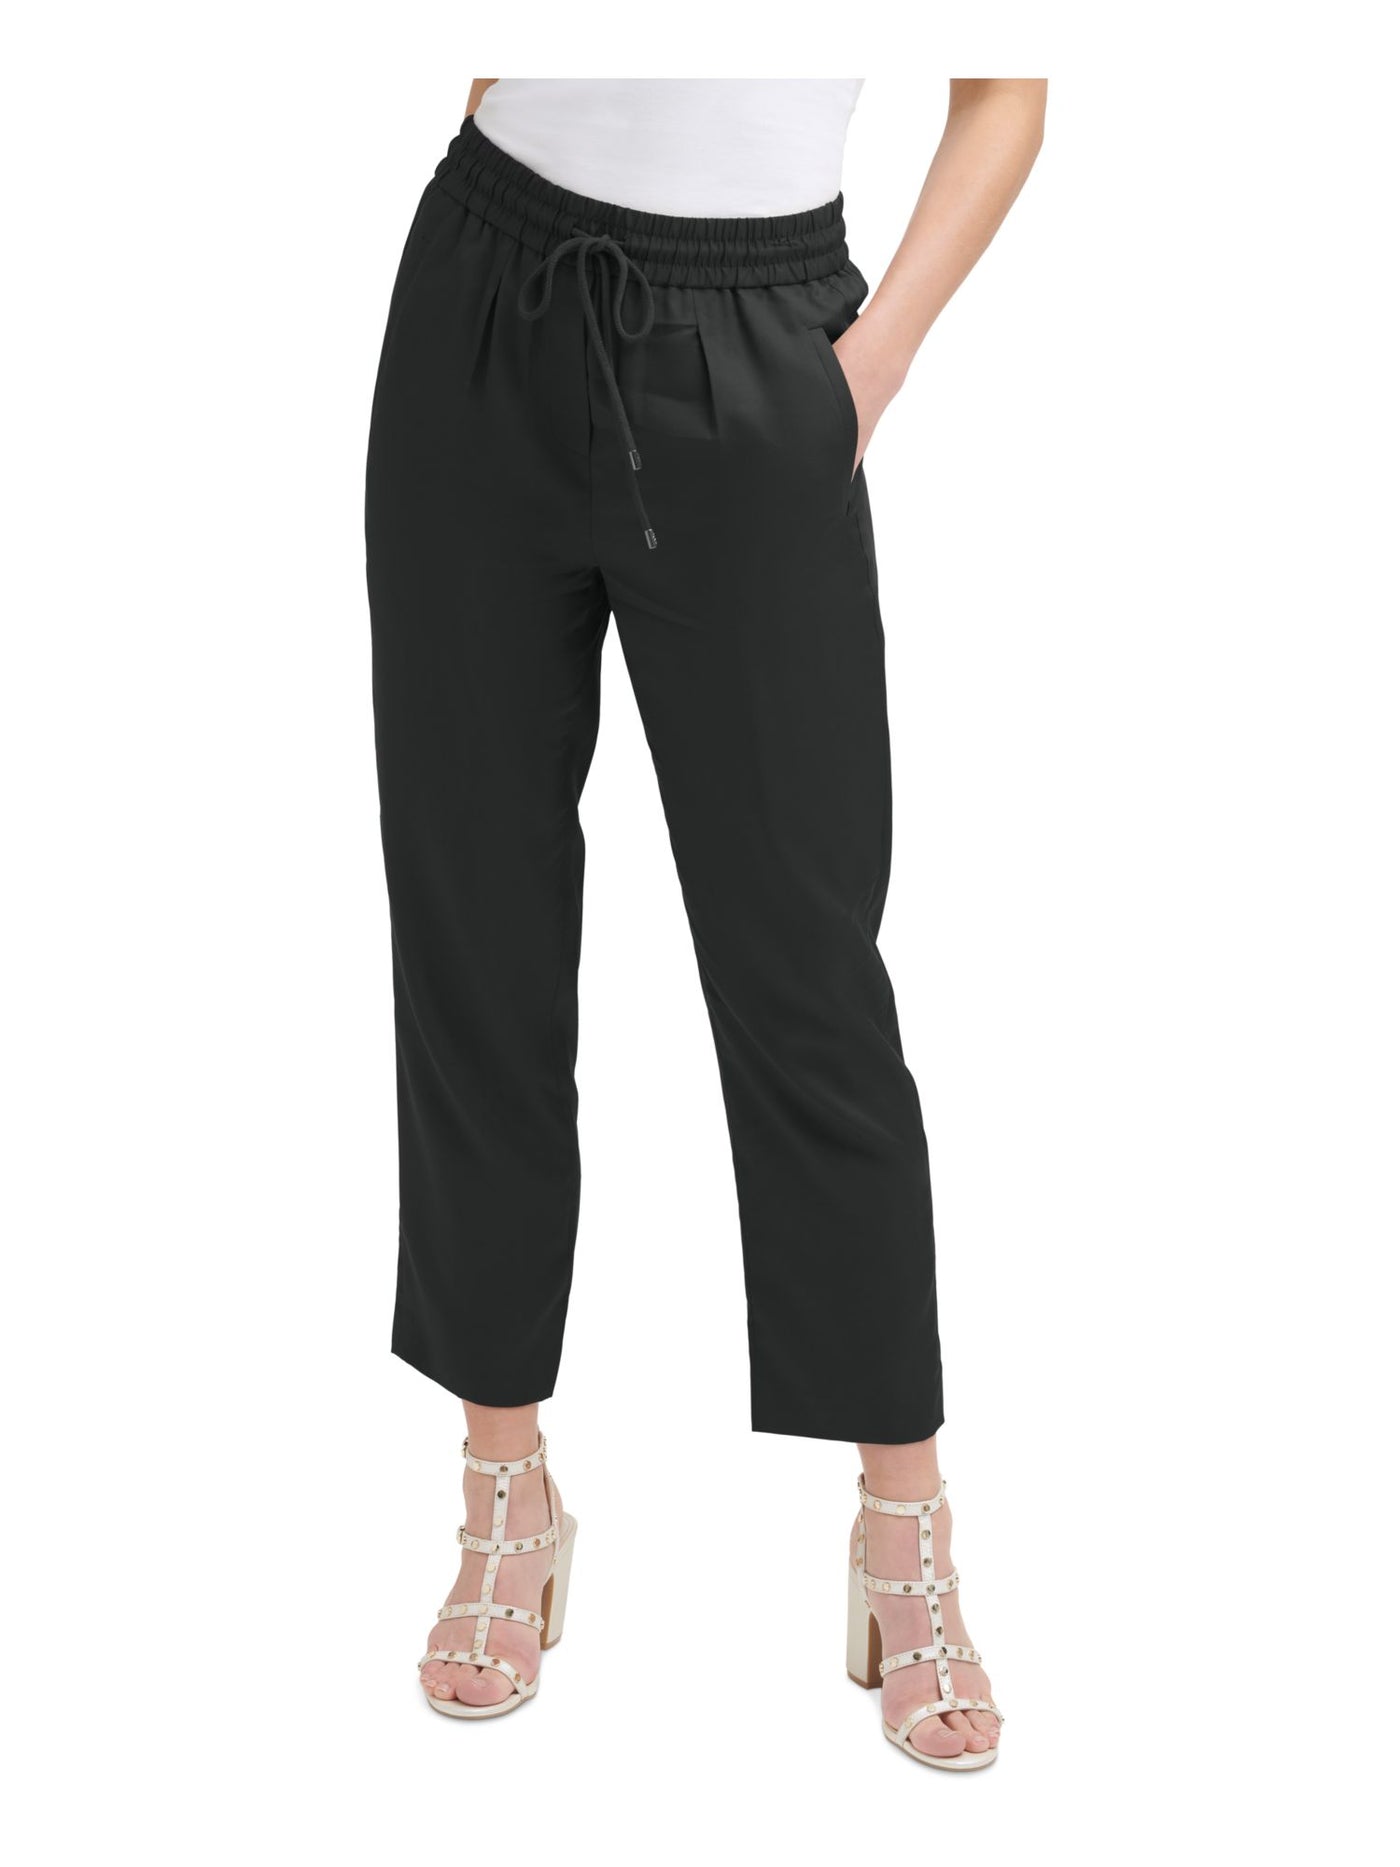 DKNY Womens Black Stretch Pocketed Pleated Drawstring Ankle Mid-rise Straight leg Pants 18